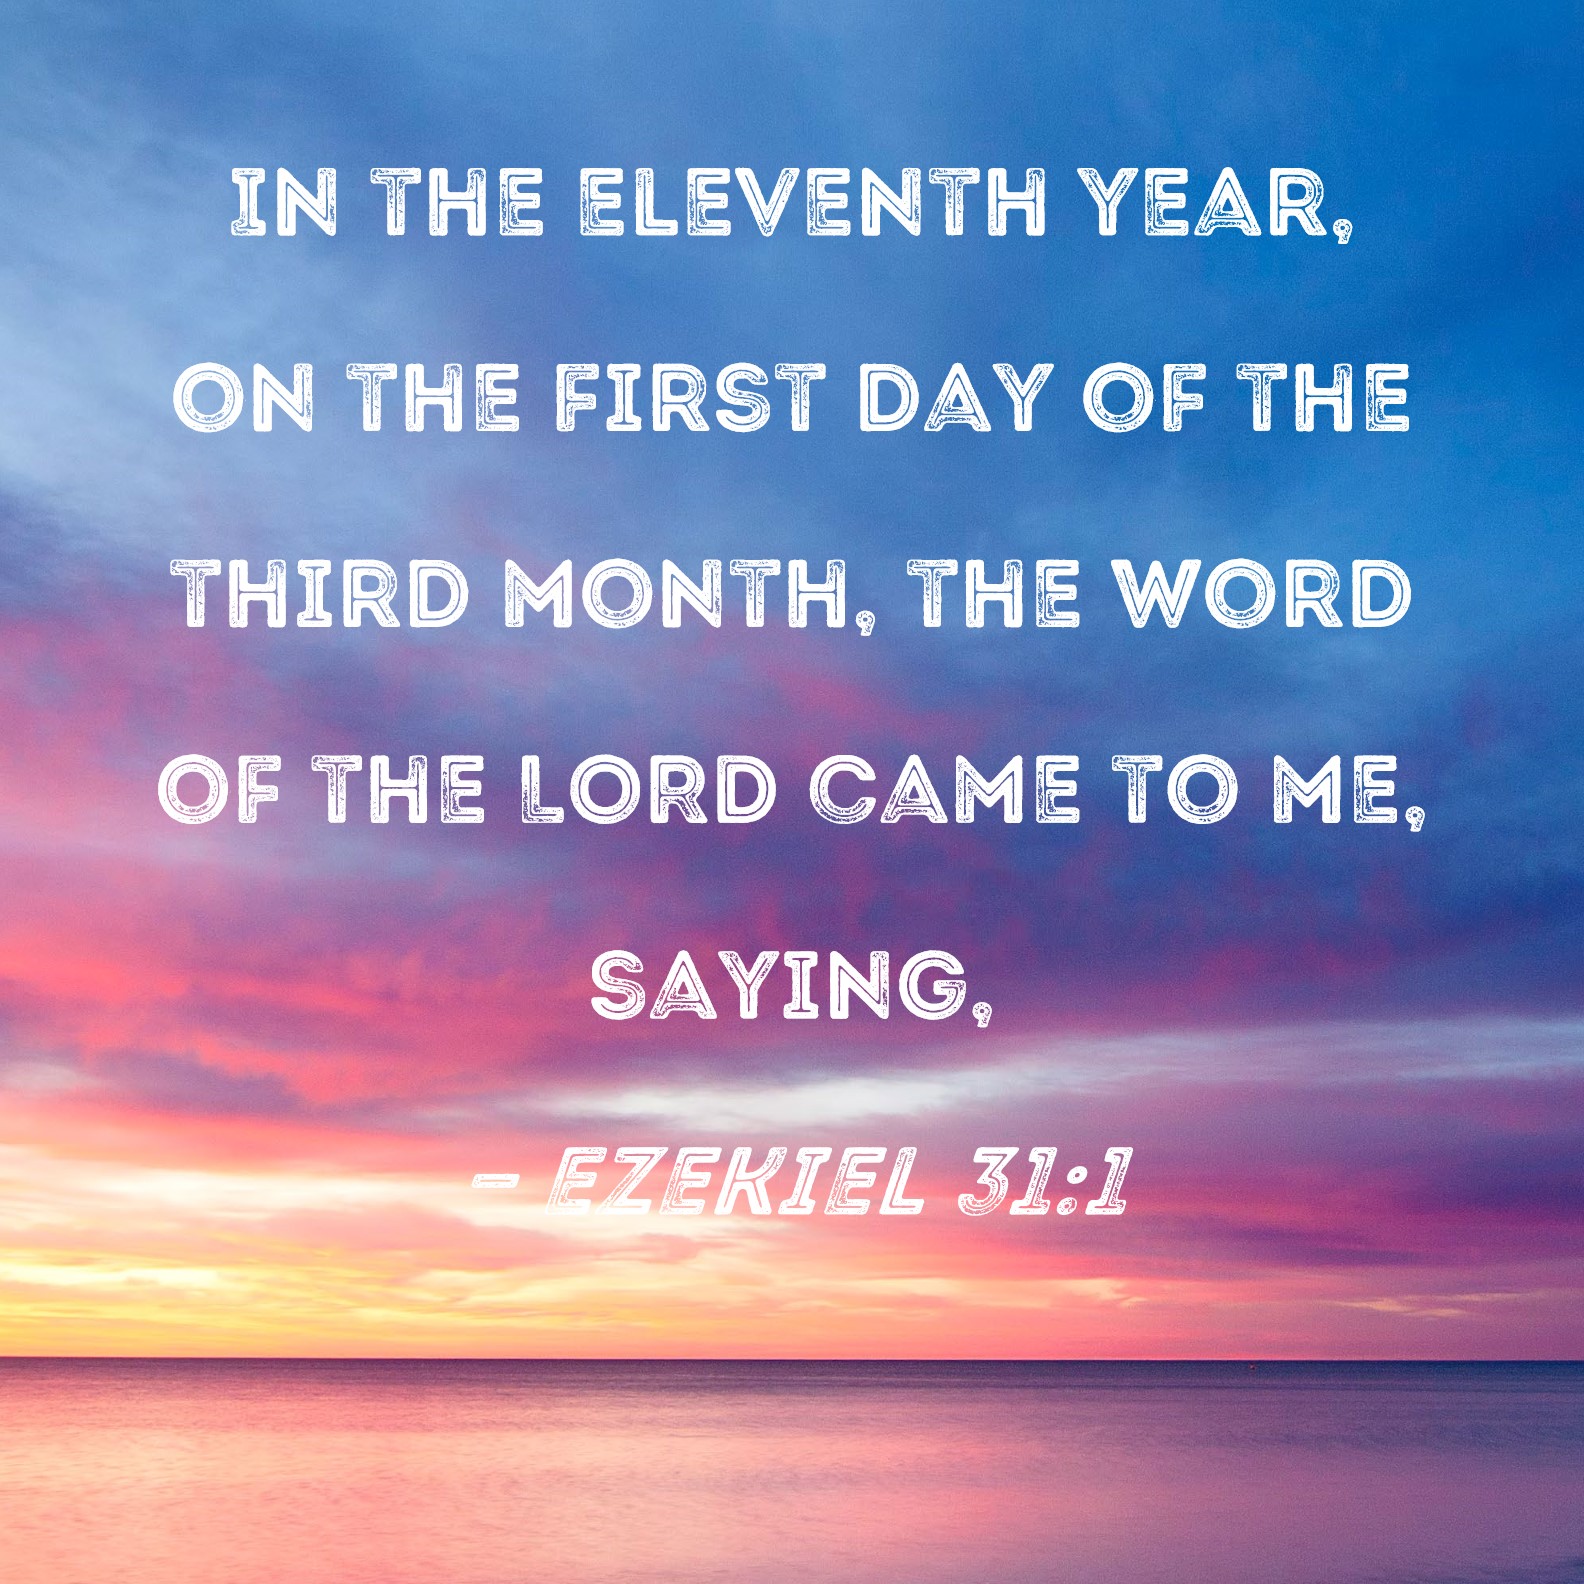 Ezekiel 311 In the eleventh year, on the first day of the third month